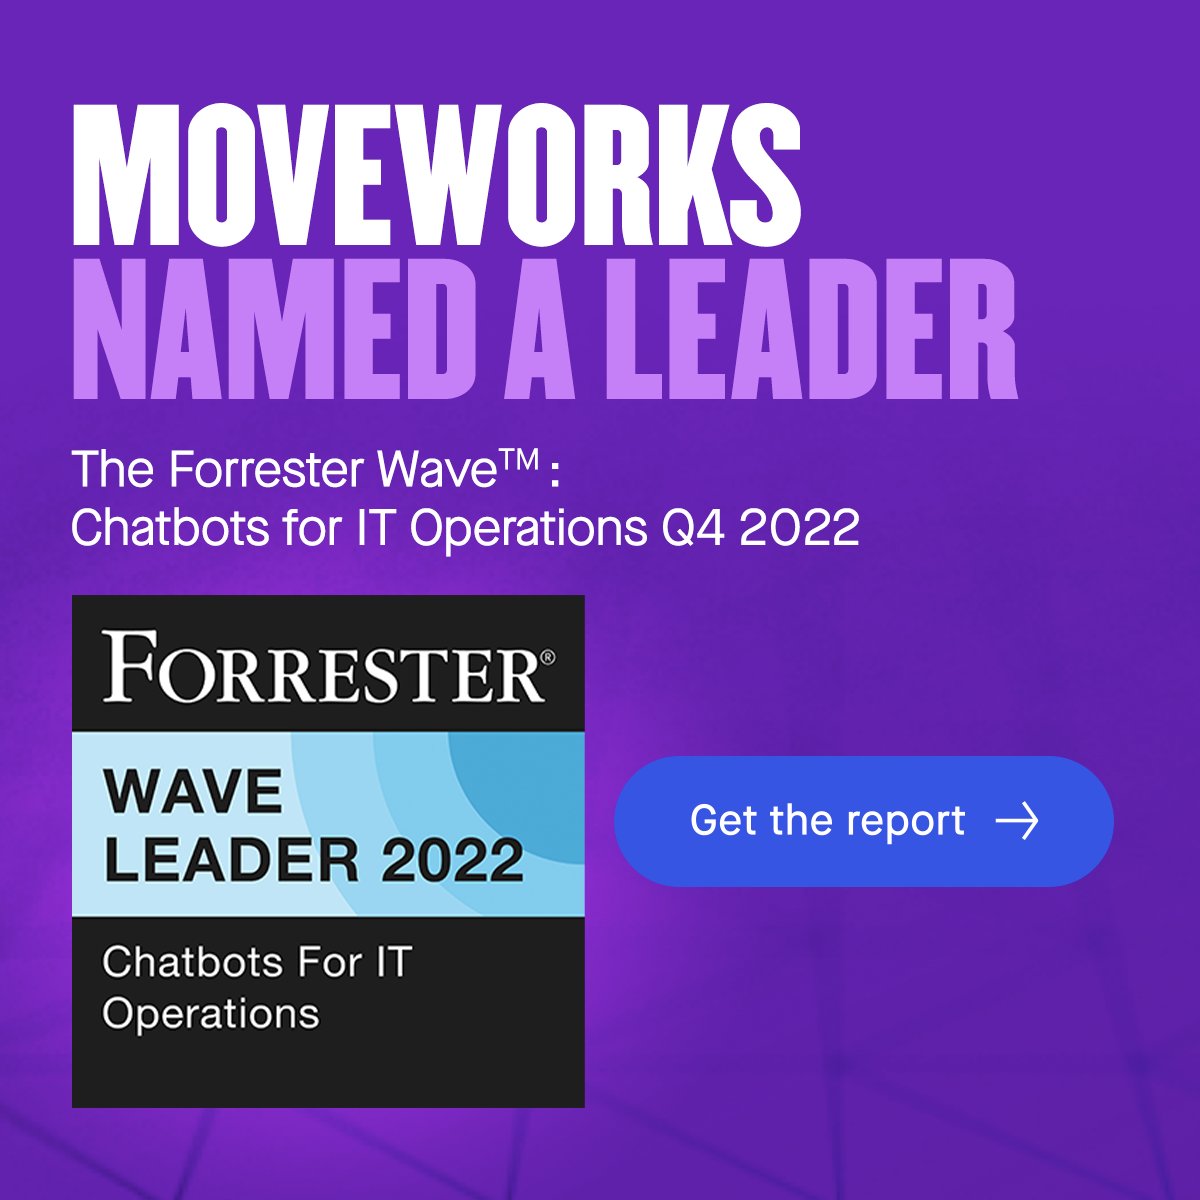 🌊 Proud to be named a Leader. Forrester cited customer enthusiasm around ease of adoption and rapid time-to-value — assigning us the highest score possible on “Chatbot Readiness', 'Product Vision', and 'Execution Roadmap.' Read our blog post for more: bit.ly/3GfofpO